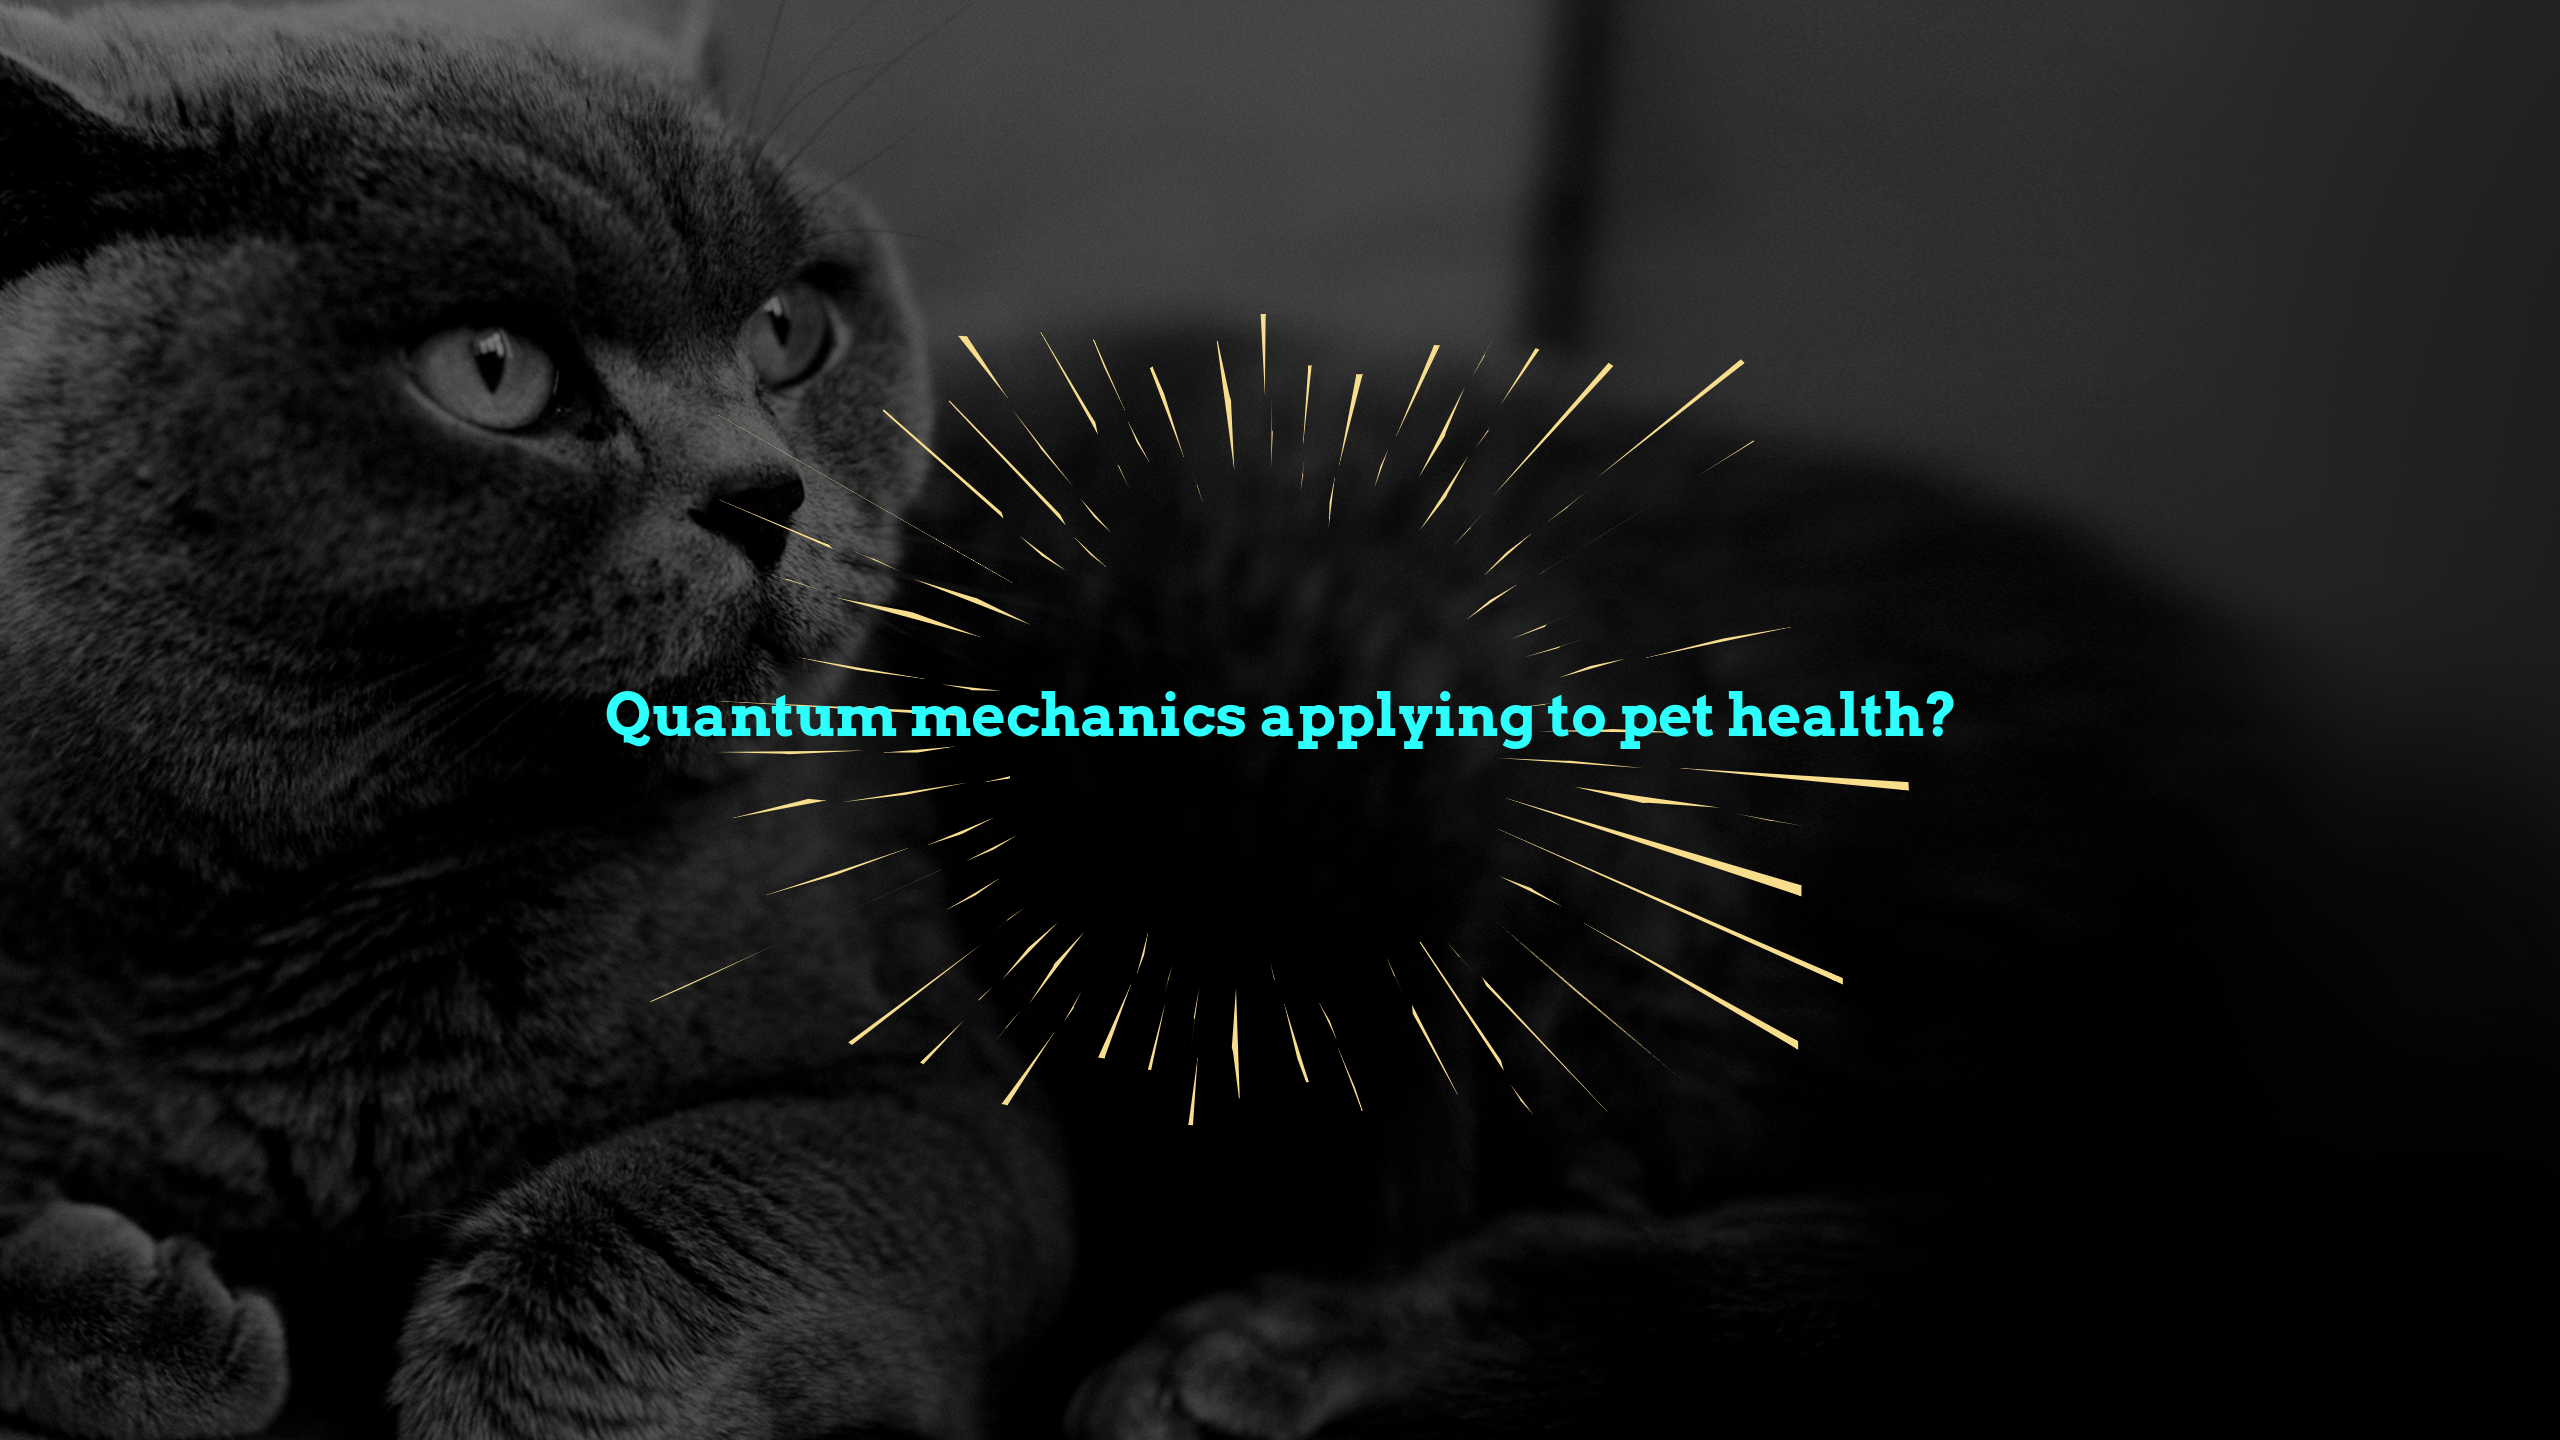 About quantum mechanics and Resonance Therapy, Science for companion animal health